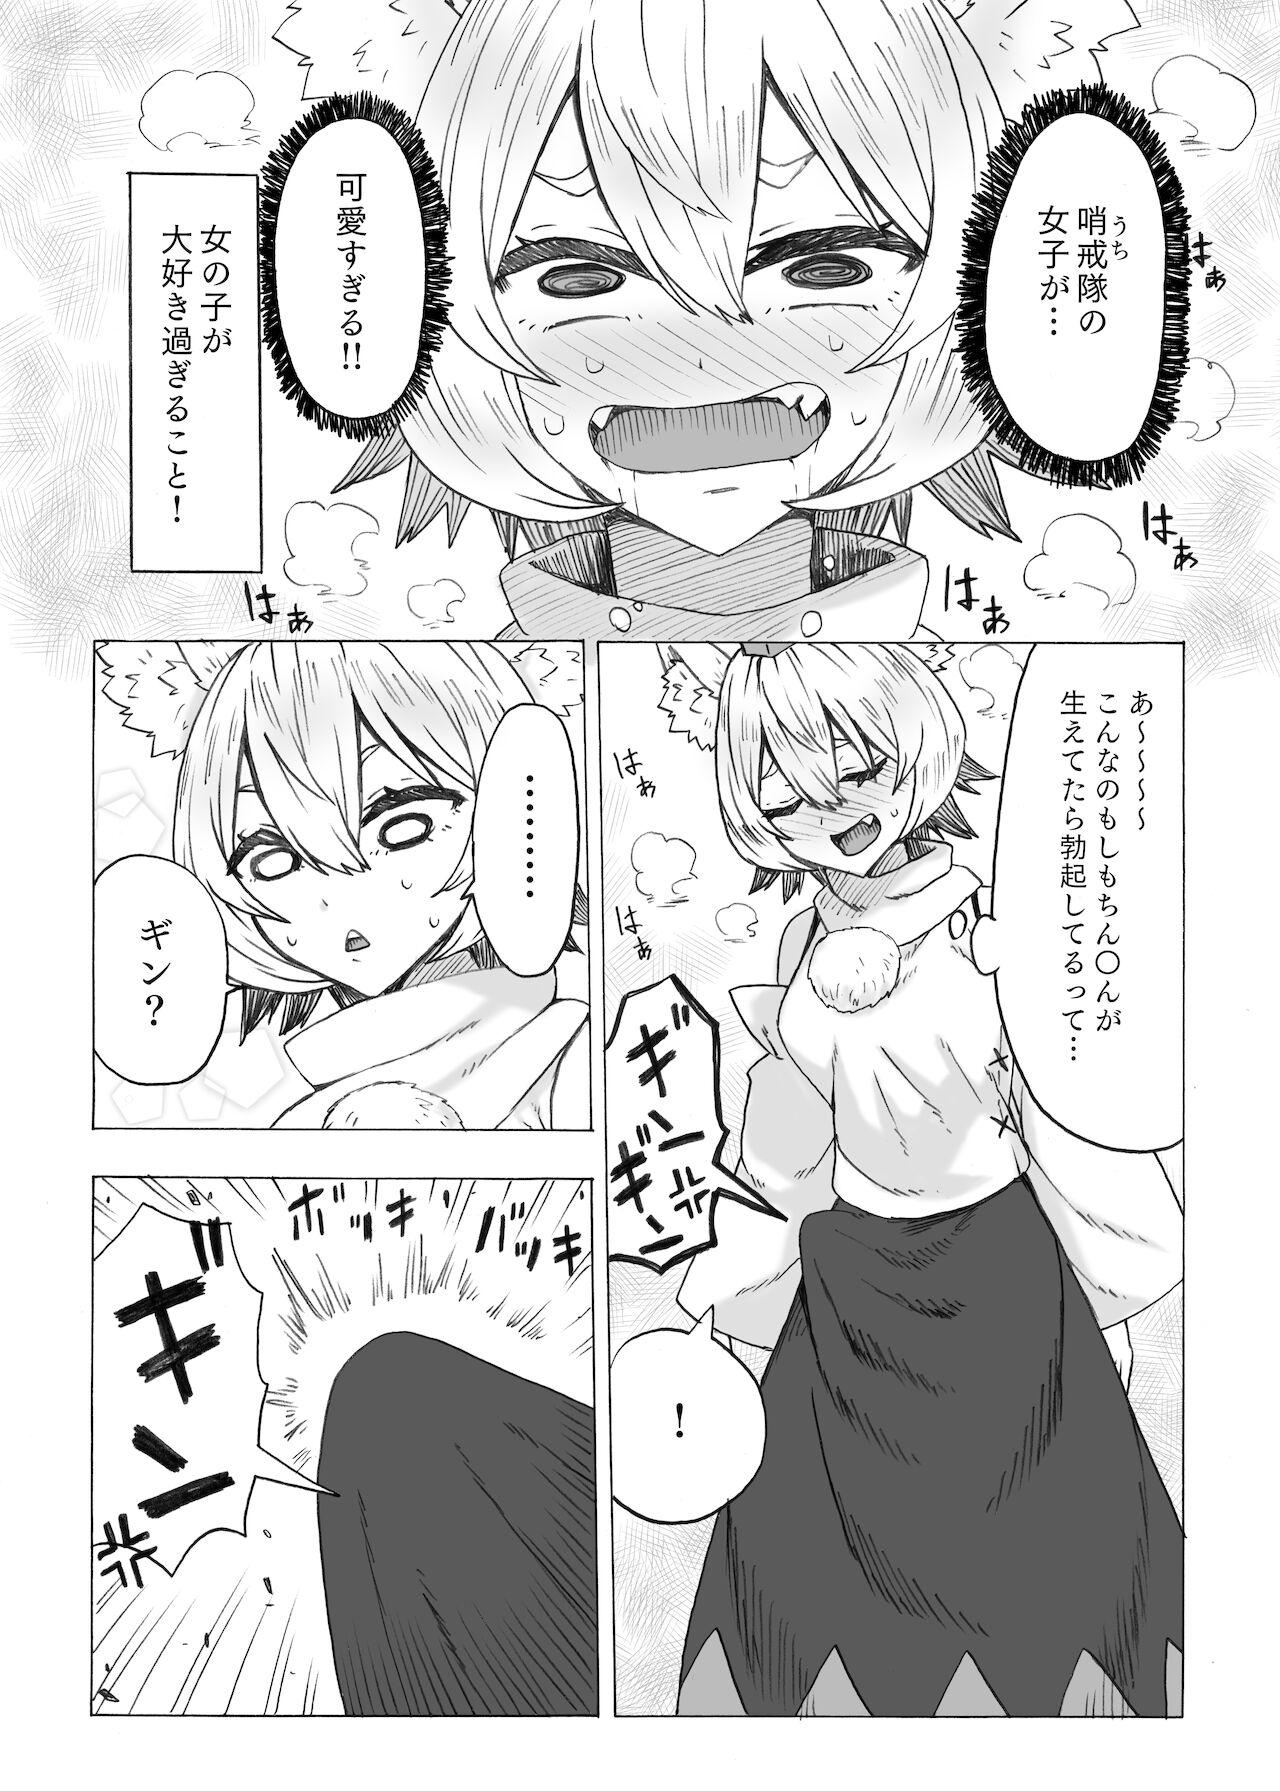 Room ふた椛がふたりに搾り尽くされる話 - Touhou project Gay - Page 4